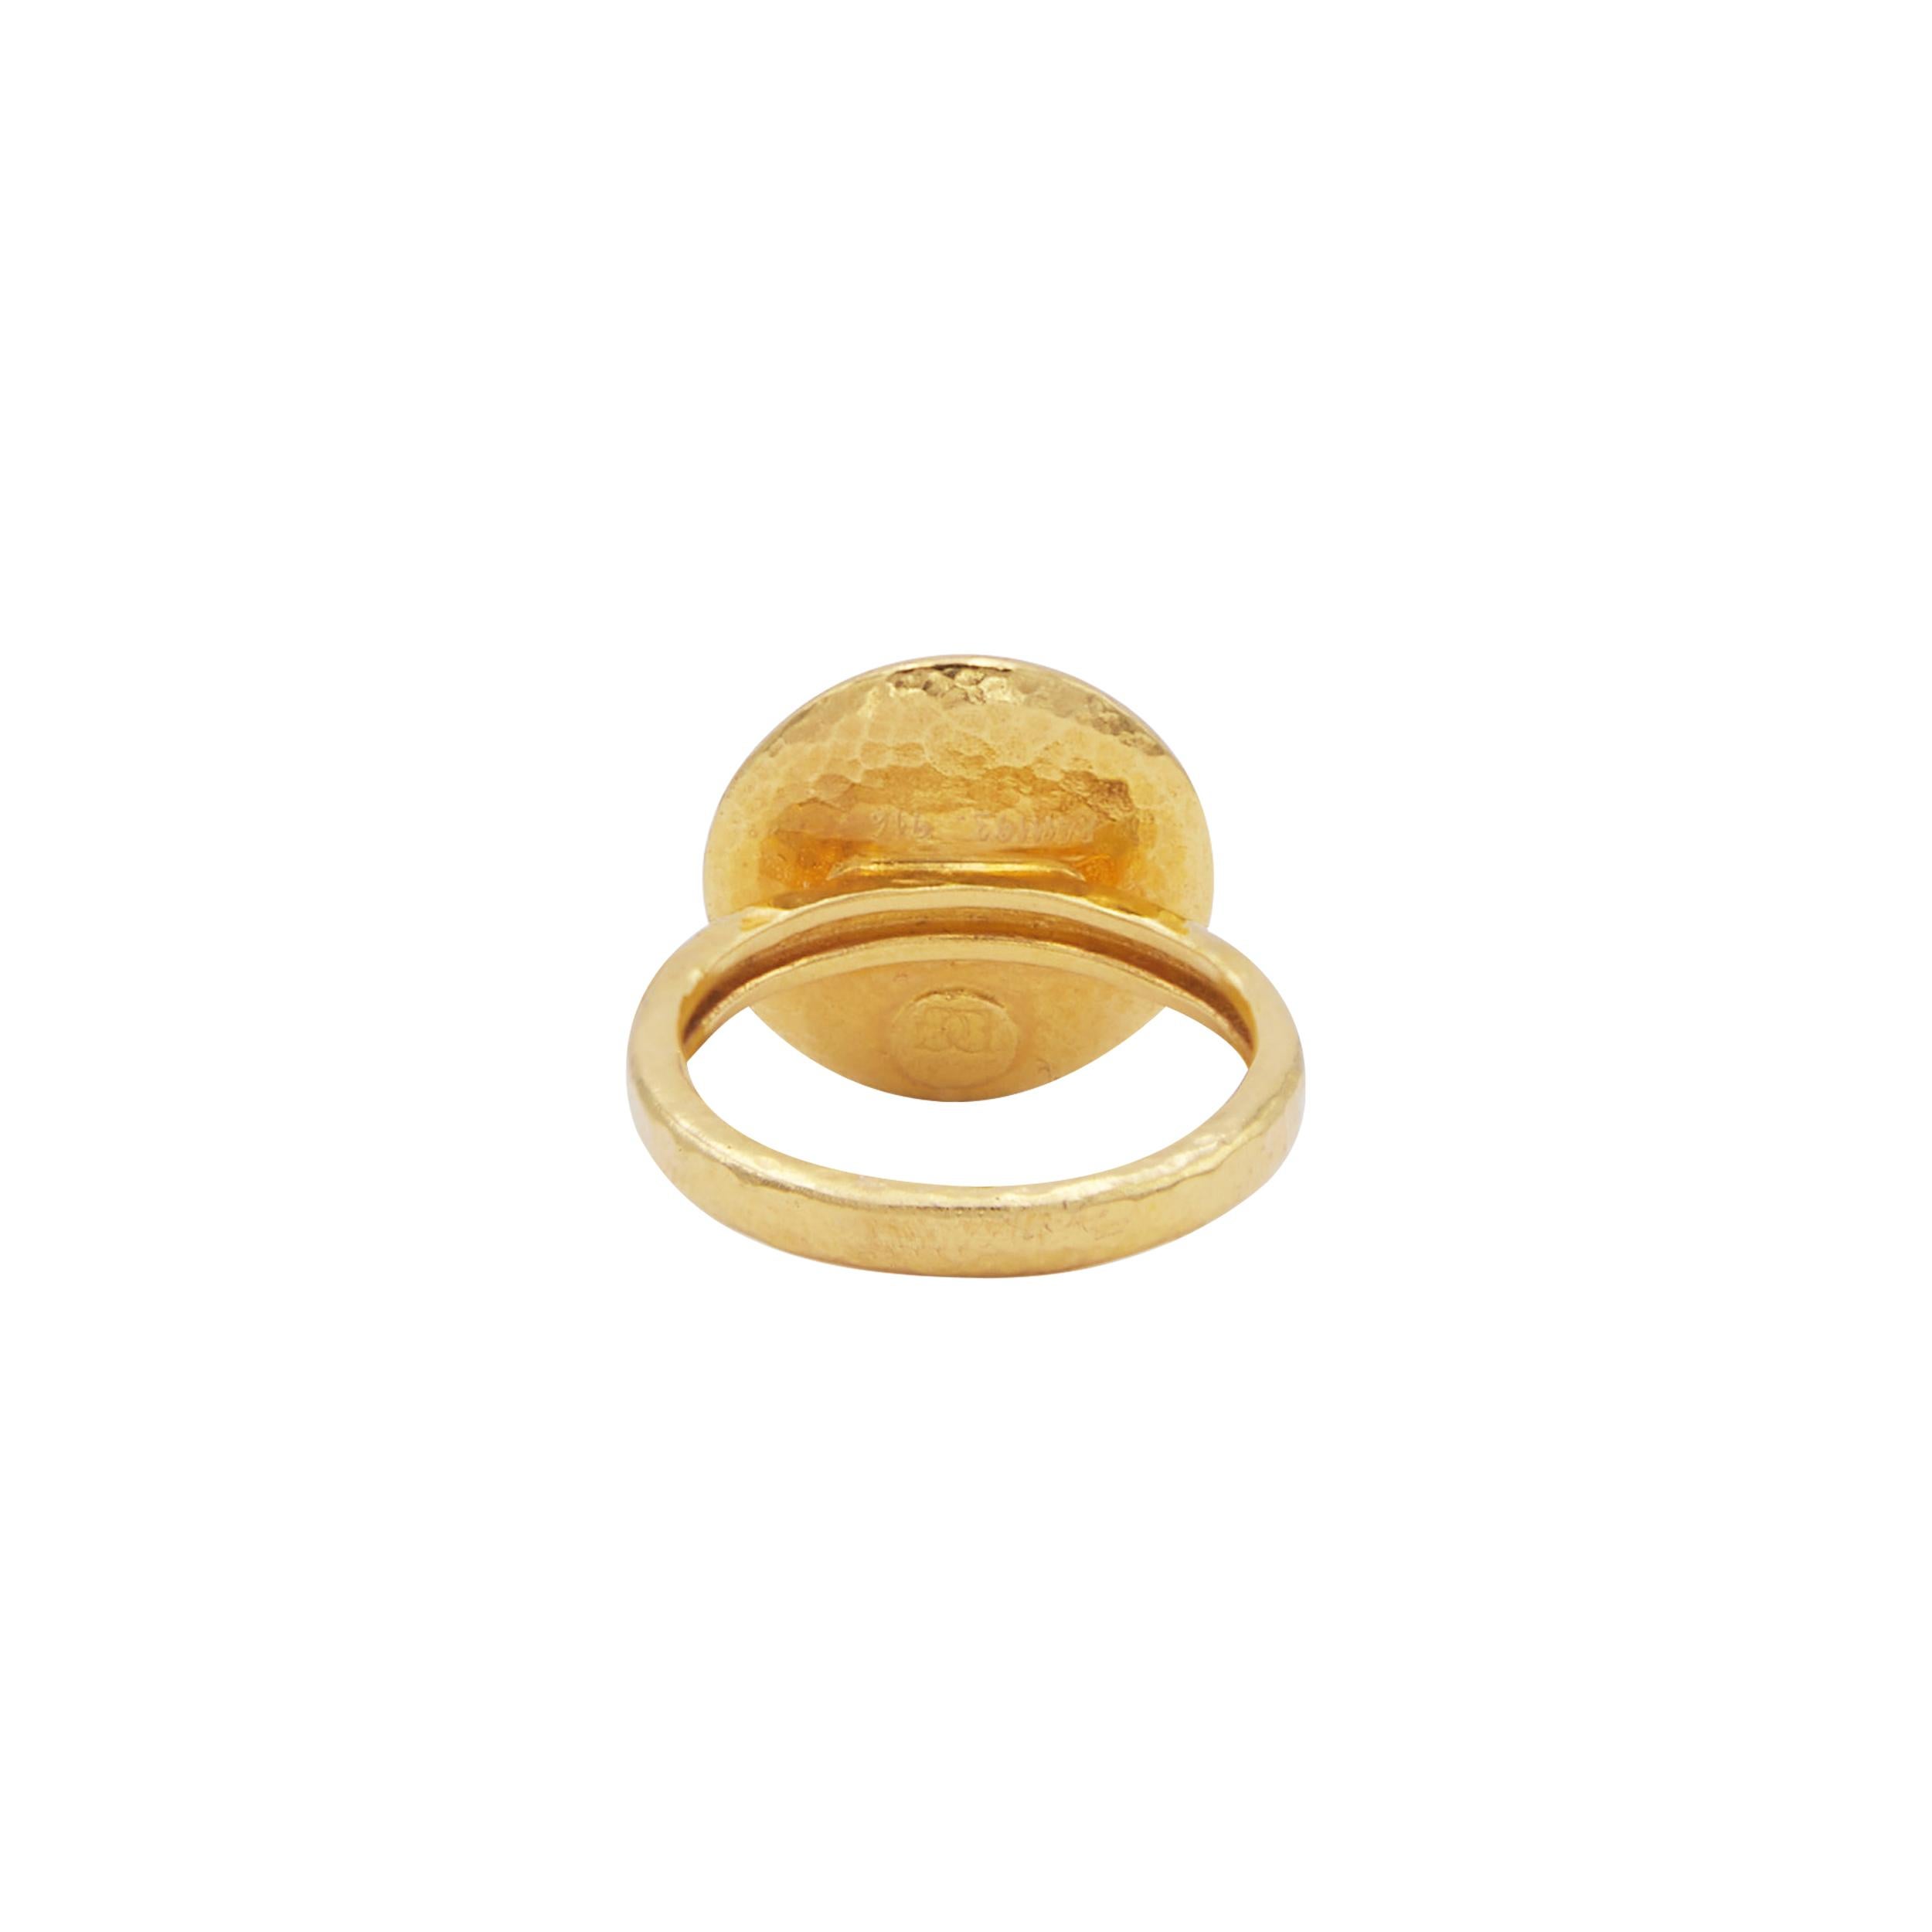 Contemporary GURHAN 22 Karat Hammered Yellow Gold and Diamond Cocktail Ring